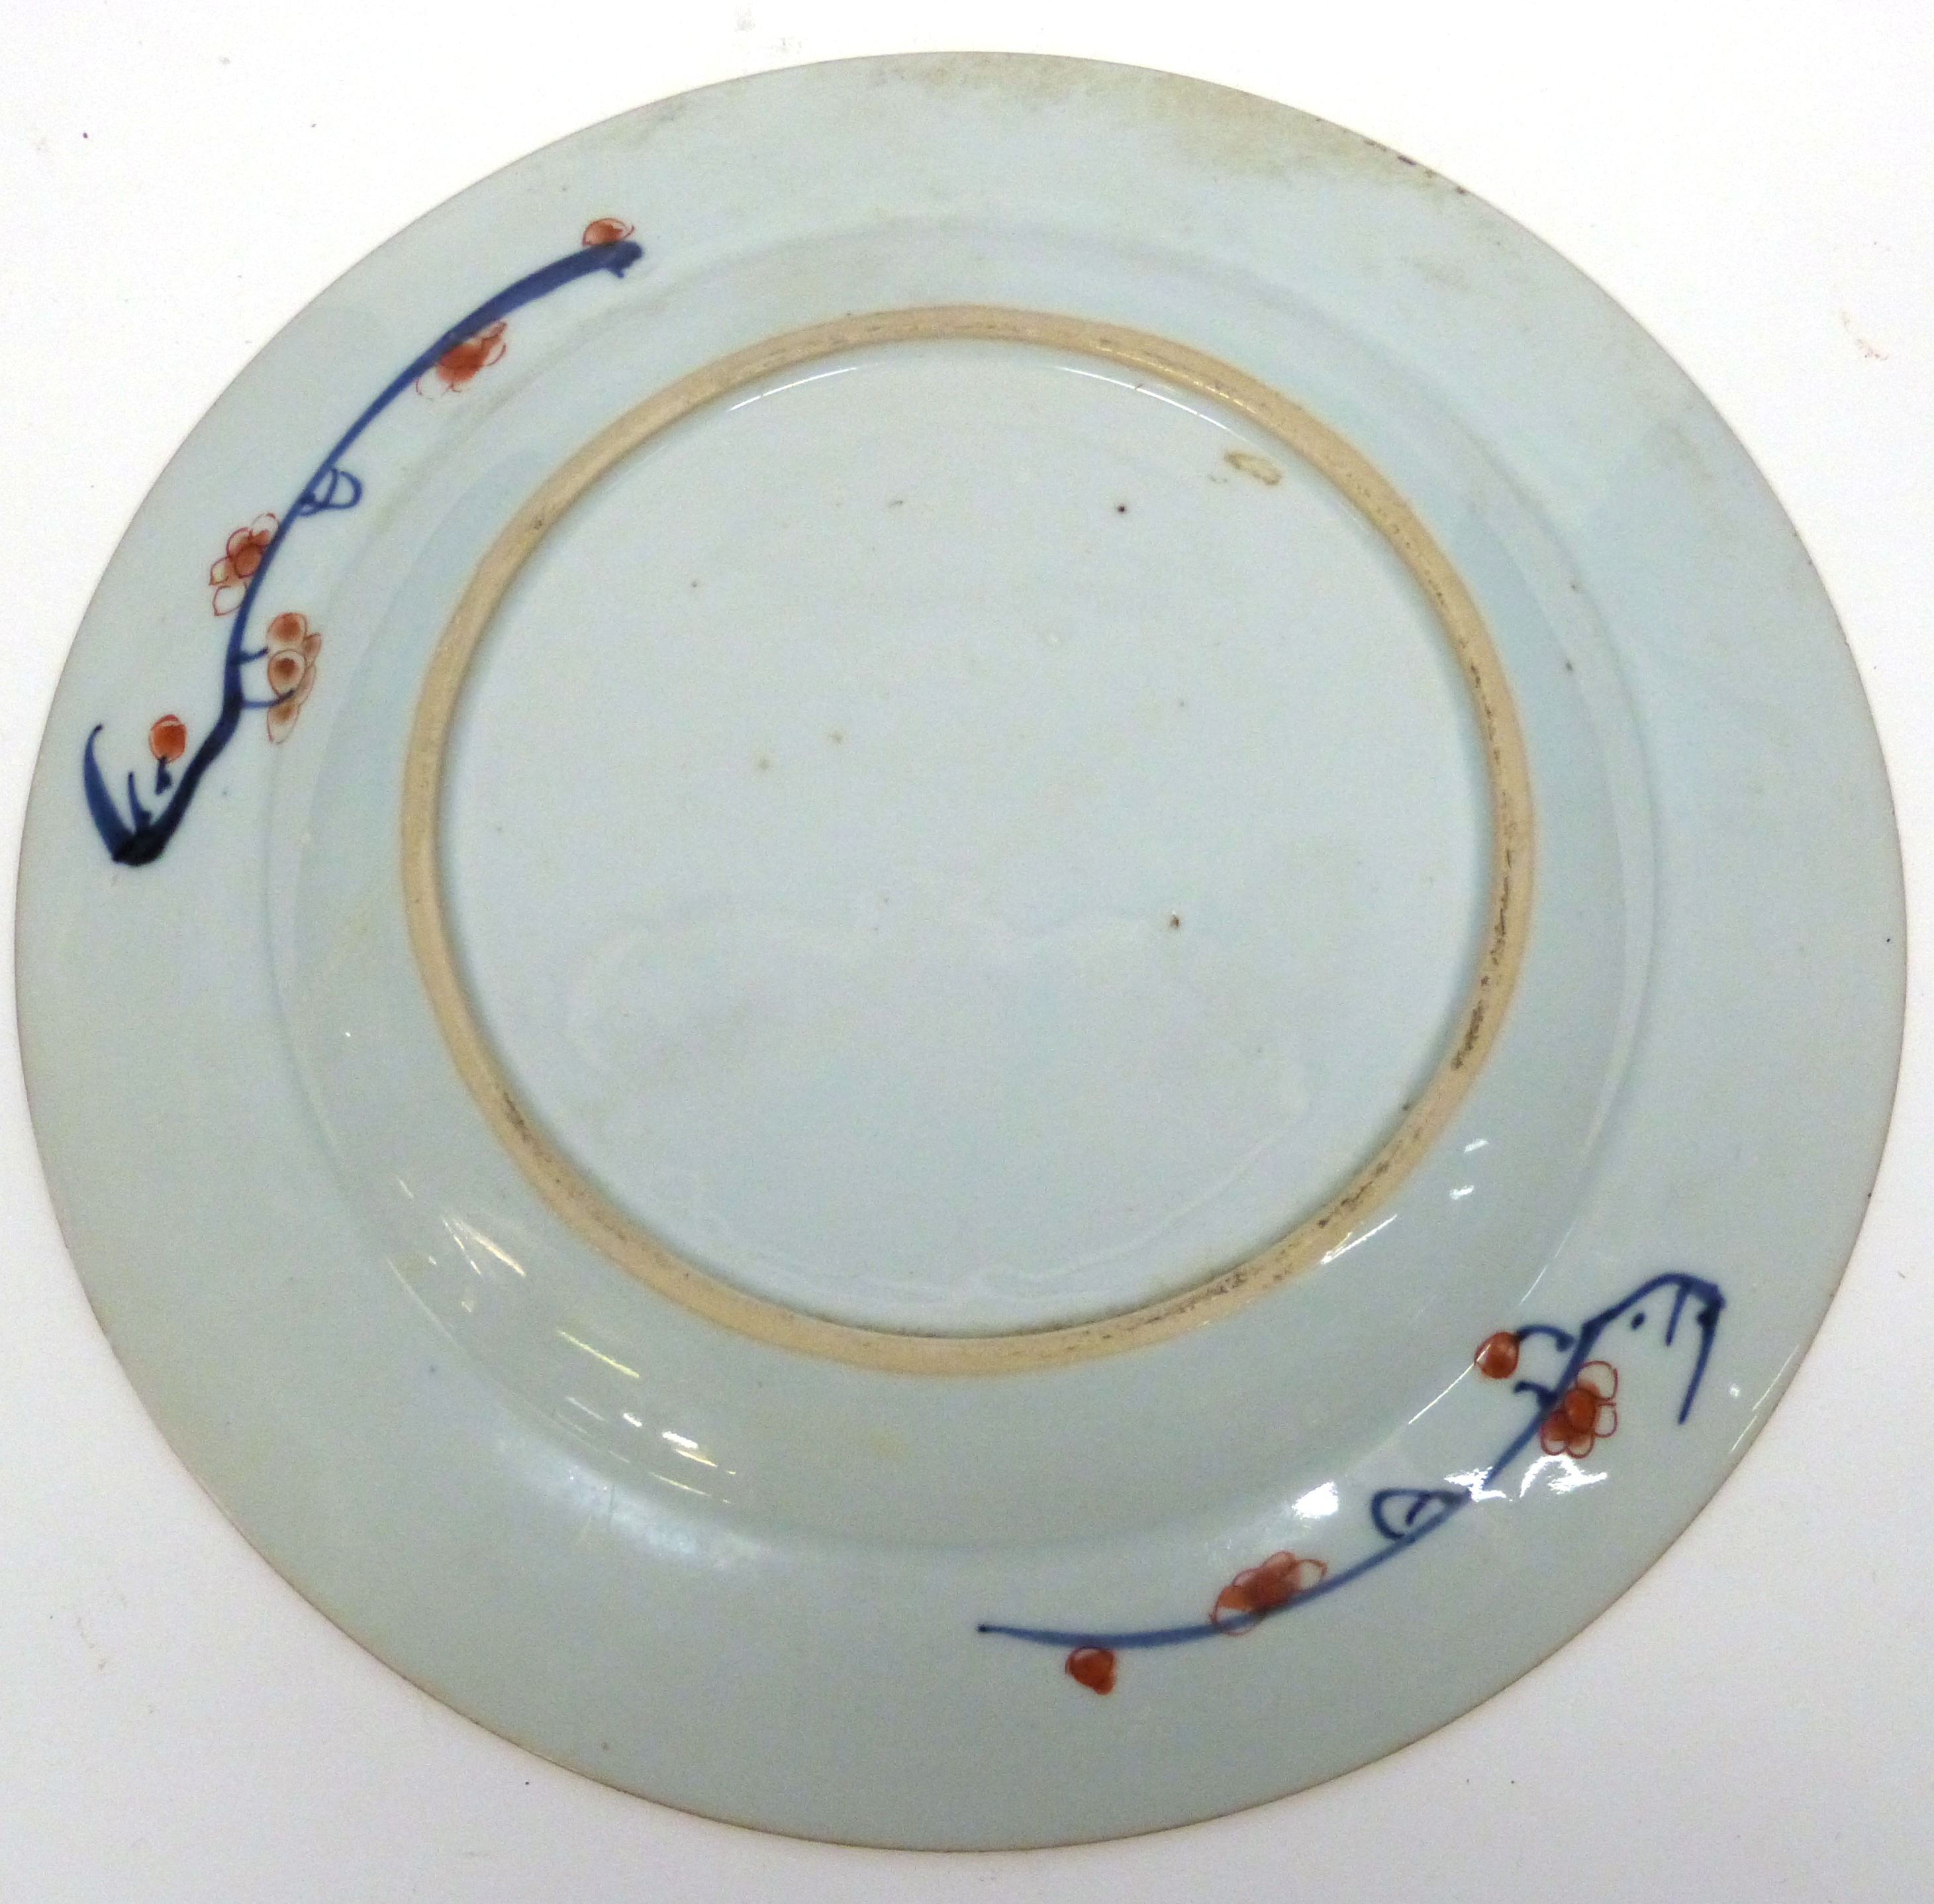 18th century Chinese porcelain blue and white plate decorated in overglaze red enamel with flowers - Image 2 of 2